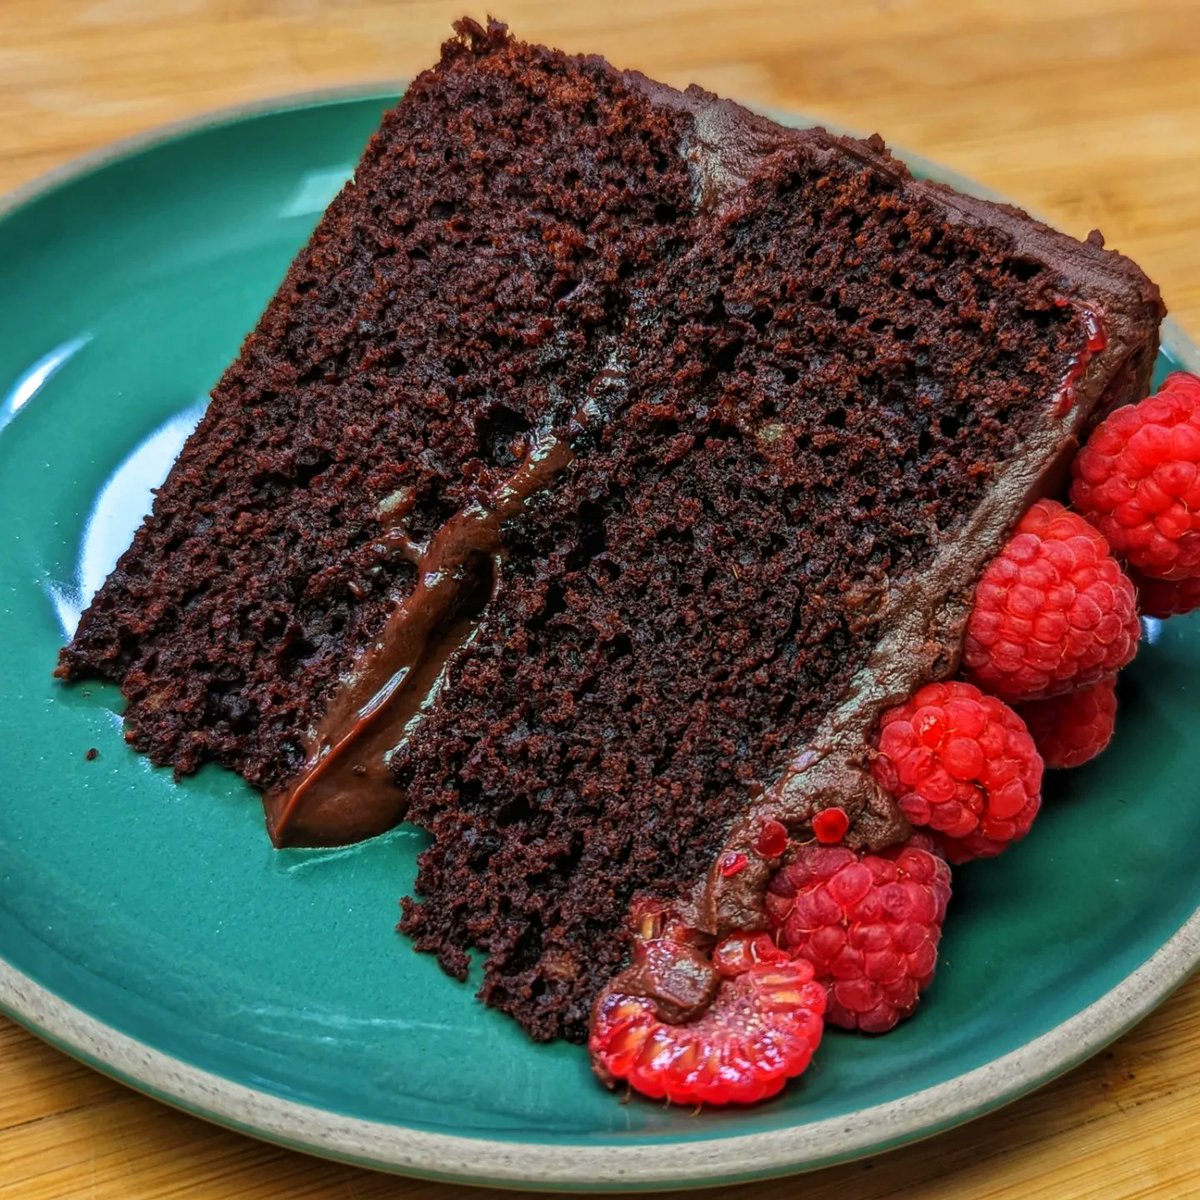 Bake Off is BACK and my obsessed self couldn't be more excited!!! Made the Cake Week technical challenge on stream yesterday - the famous (if only for the missing raspberry) Chocolate Fudge Cake!
#BanzaiBites #CakeWeek #GBBO #BakeOffWannabe
#ChocolateFudgeCake #TechnicalChallenge